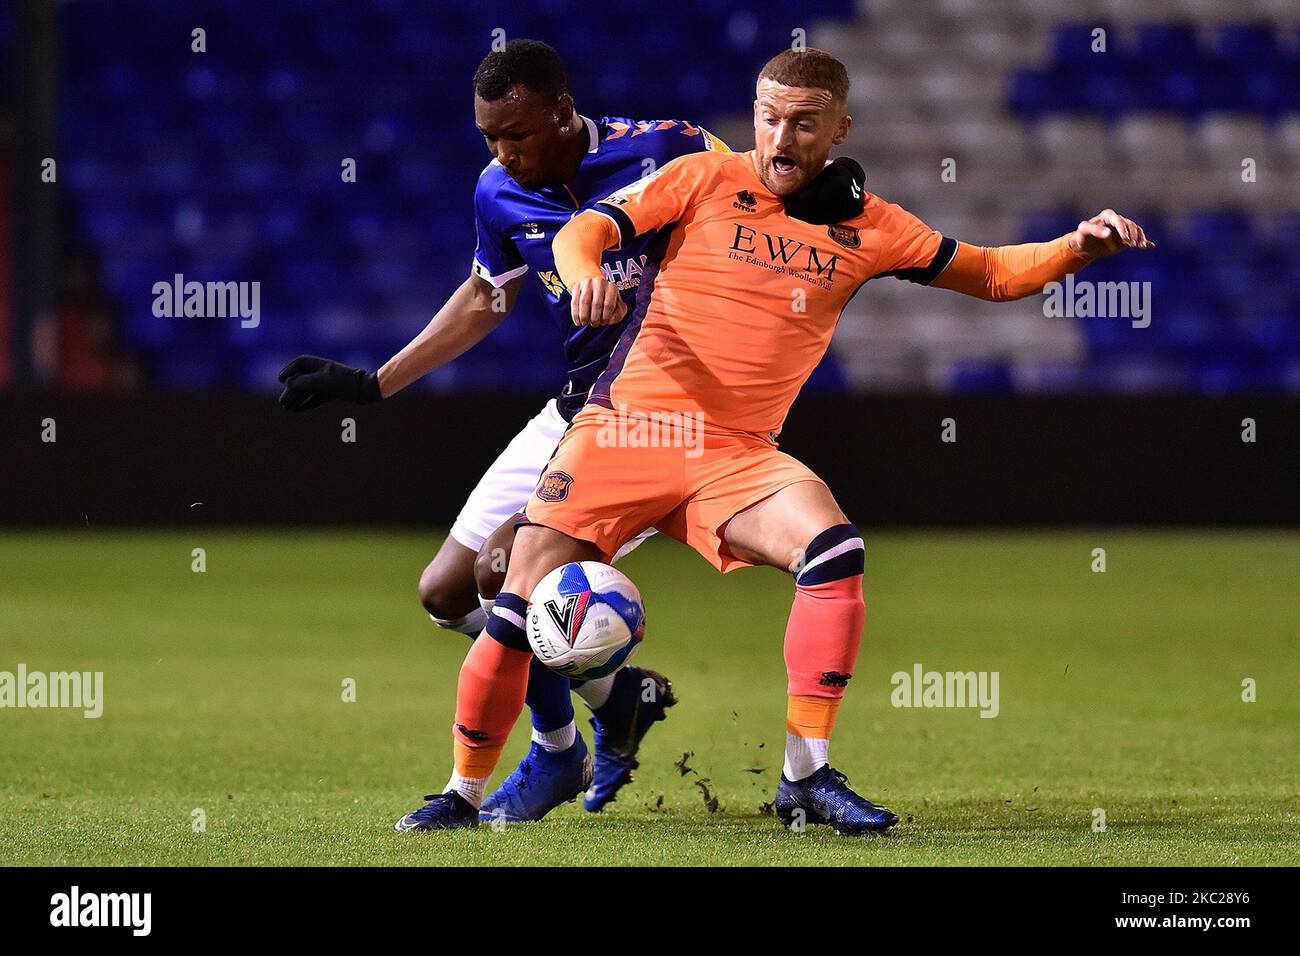 Oldham Athletic's Brice Ntambwe and Carlise United's Lewis Alessandra in action during the Sky Bet League 2 match between Oldham Athletic and Carlise United at Boundary Park, Oldham on Tuesday 20th October 2020. (Photo by Eddie Garvey/MI News/NurPhoto) Stock Photo